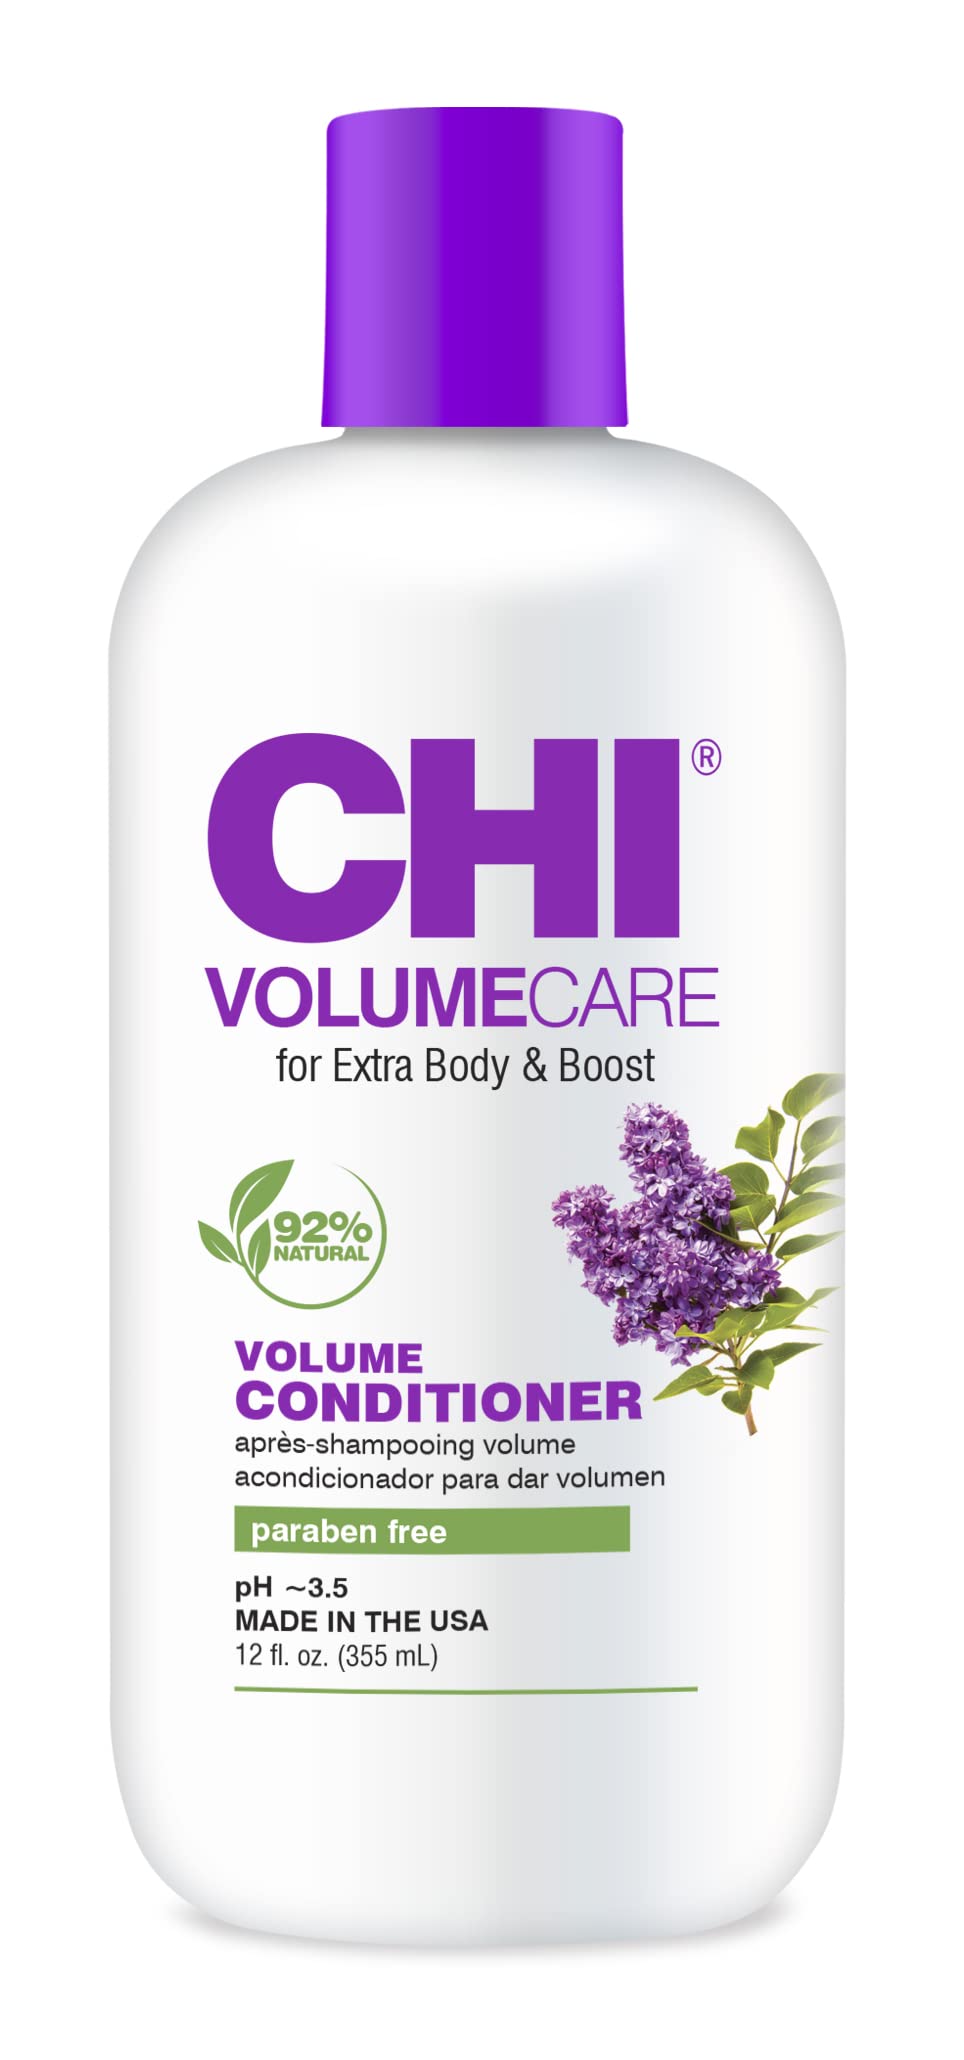 CHI VolumeCare - Volumizing Conditioner 12 fl oz - Increases Volume on Thin, Fine, or Flat Hair for Extra Body and Boost Without Weighing It Down